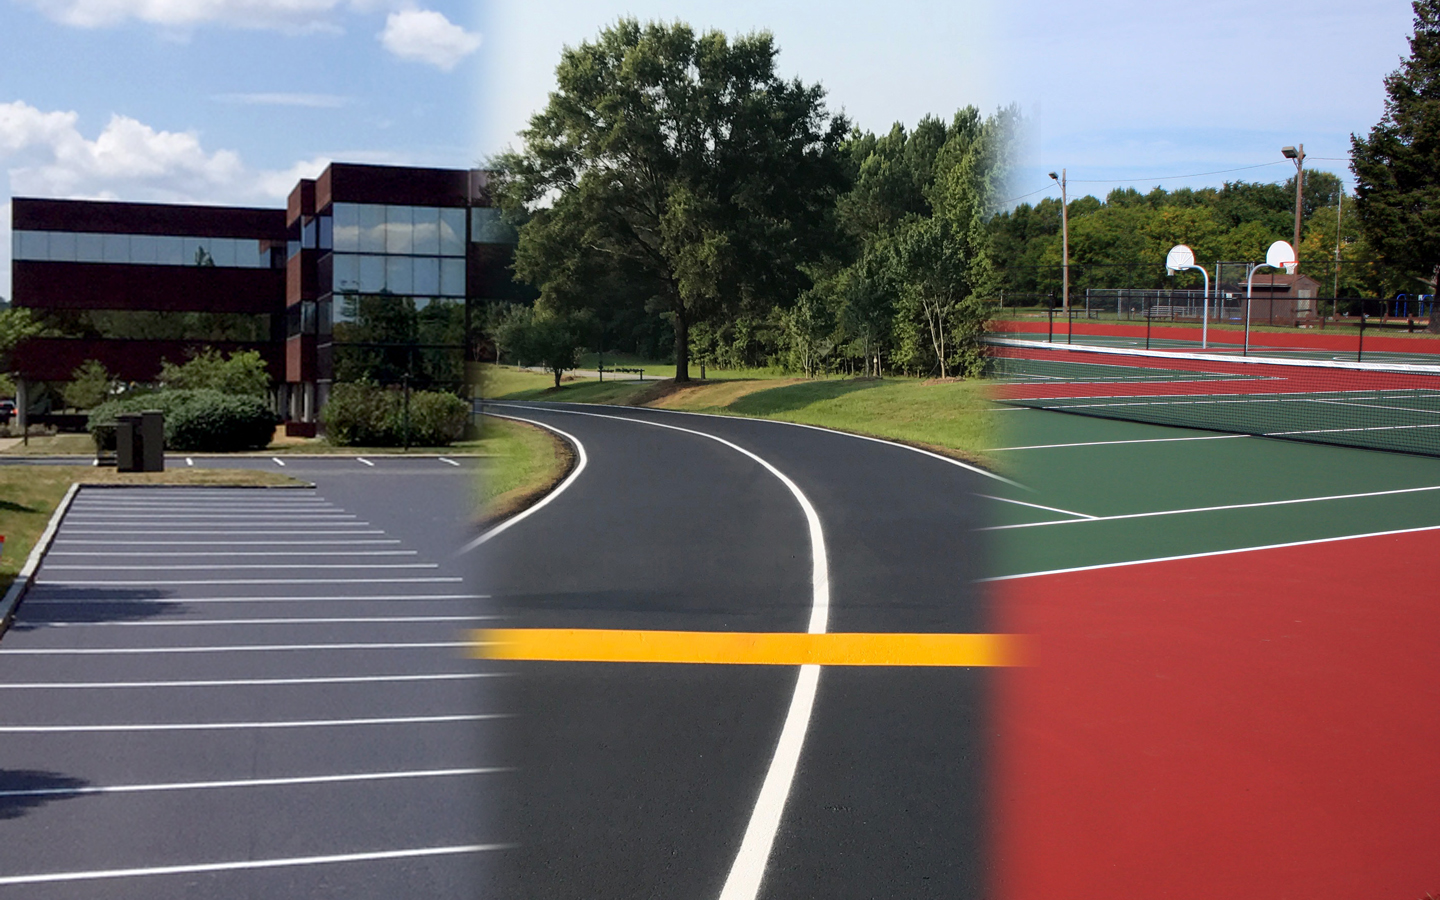 Parking lot roadway and athletic court image